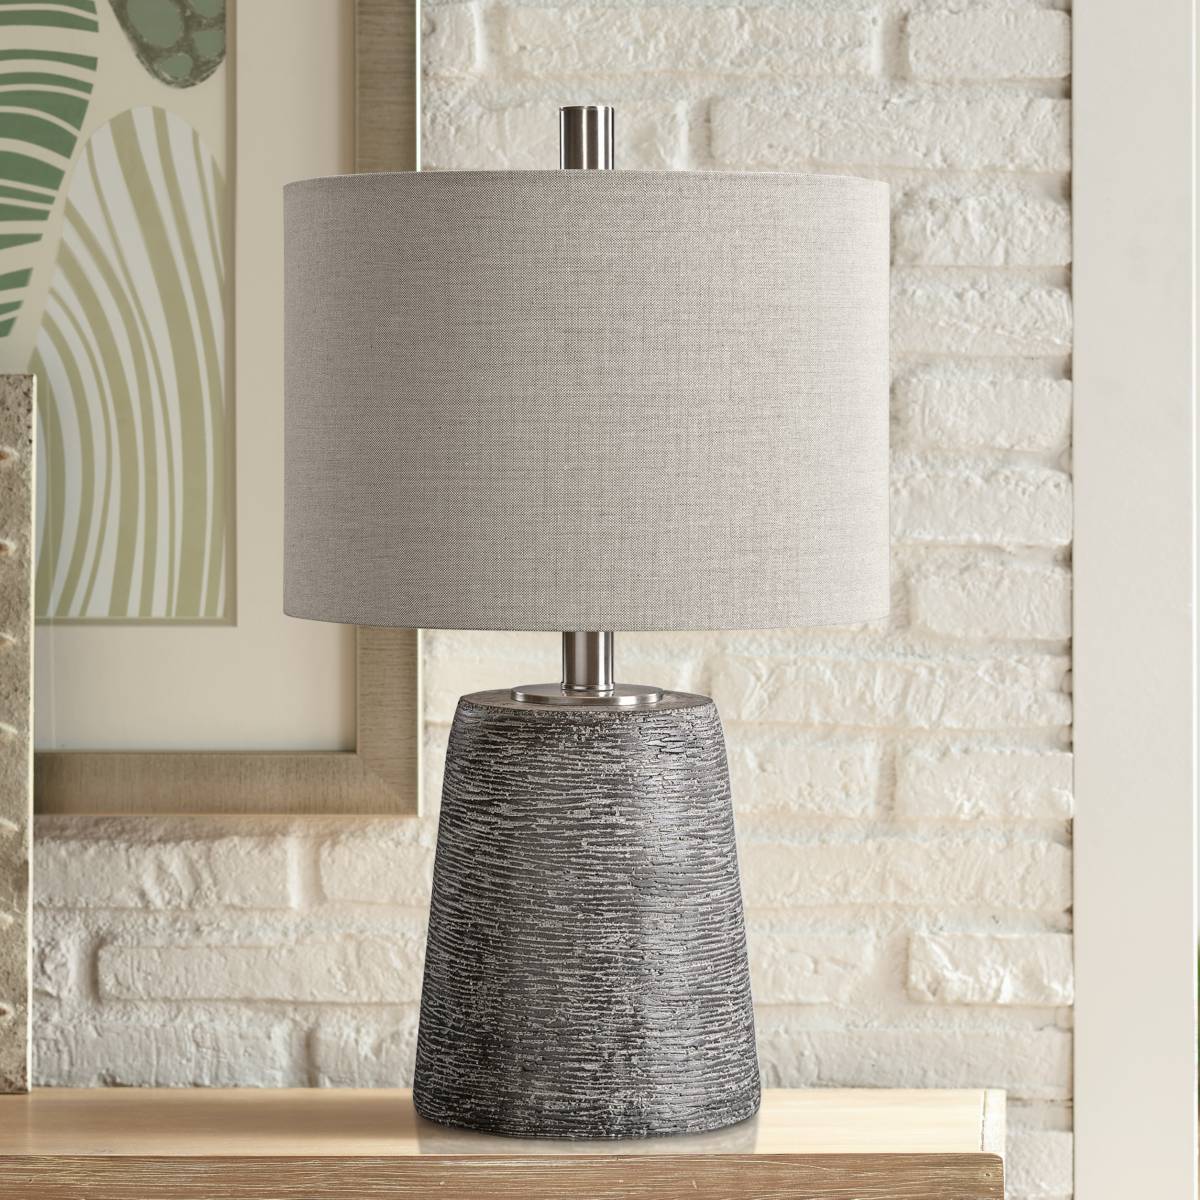 Transitional Table Lamps - Page 3 | Lamps Plus